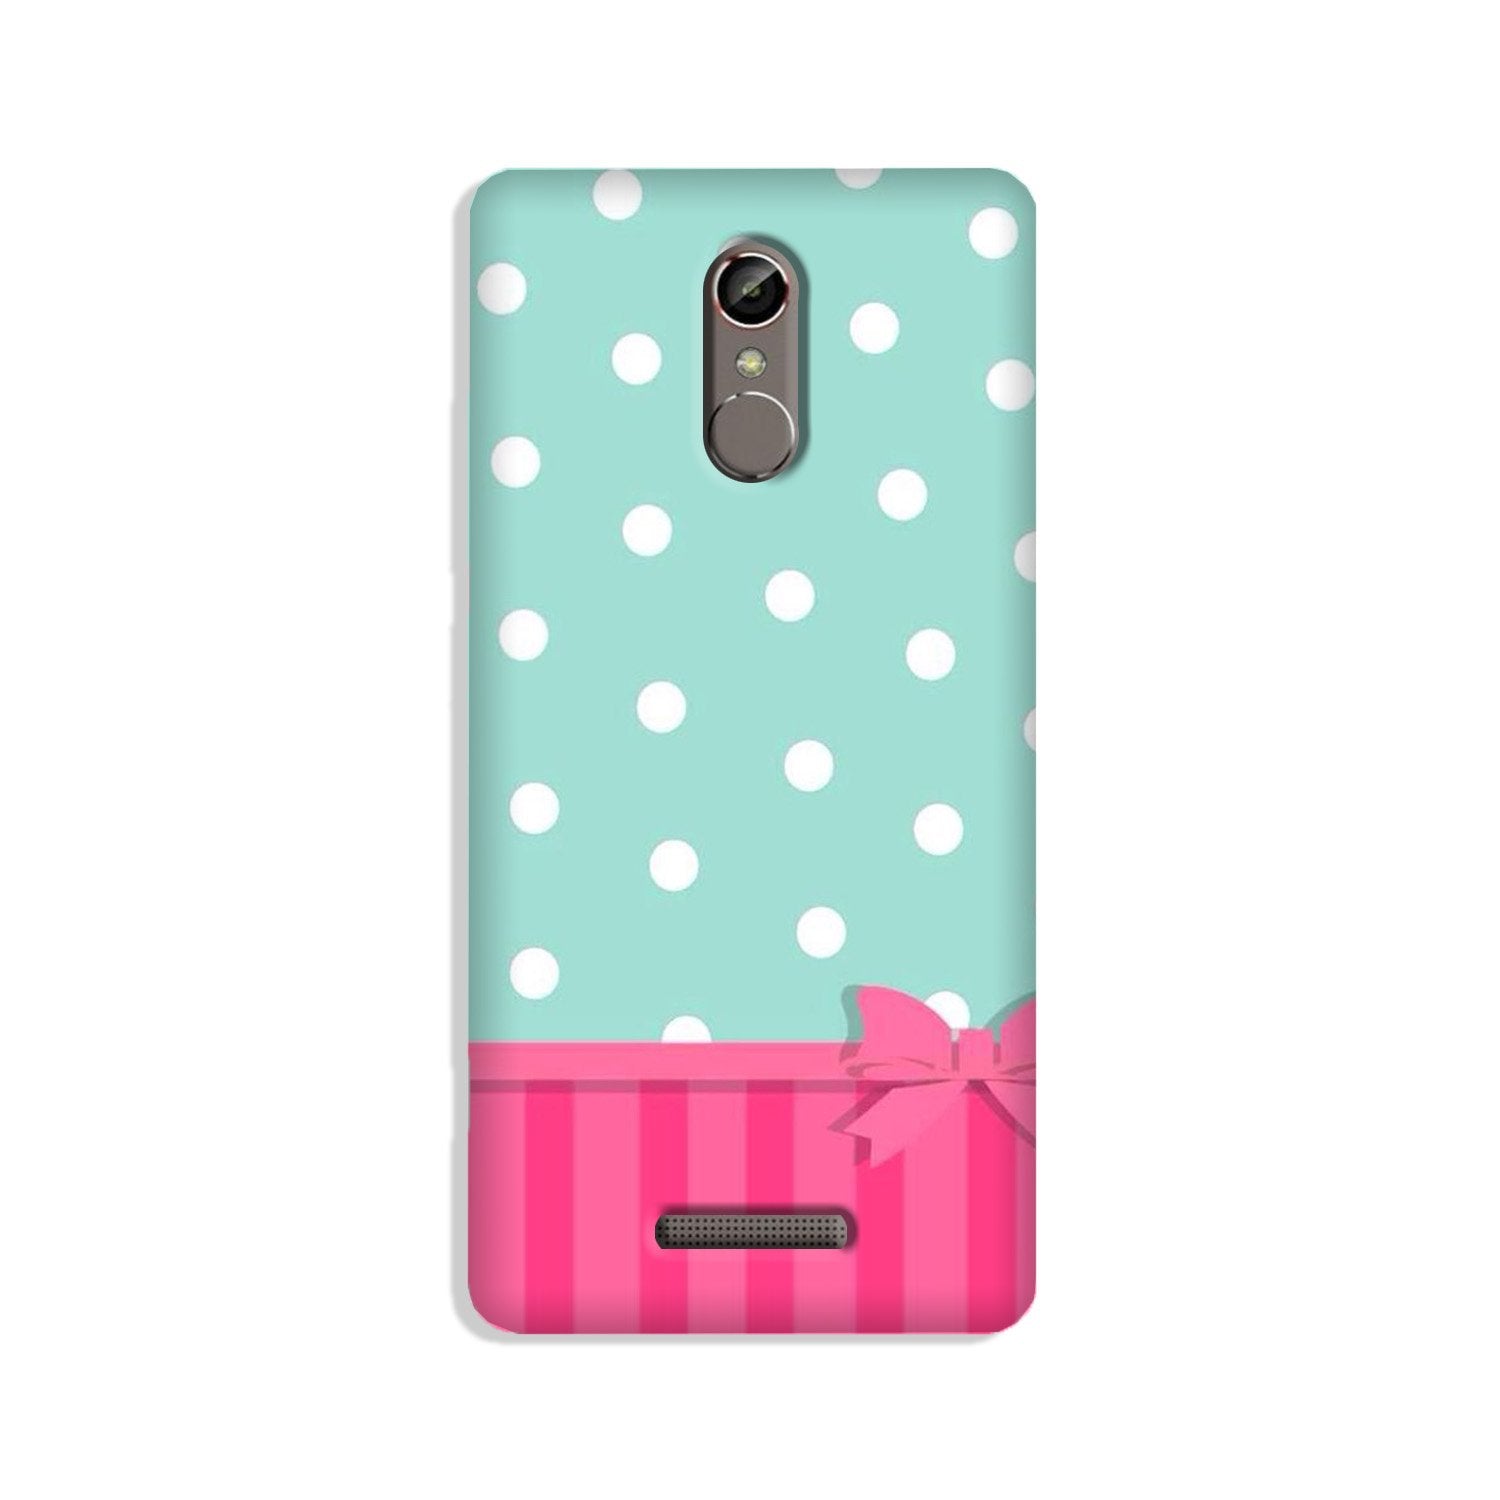 Gift Wrap Case for Redmi Note 3